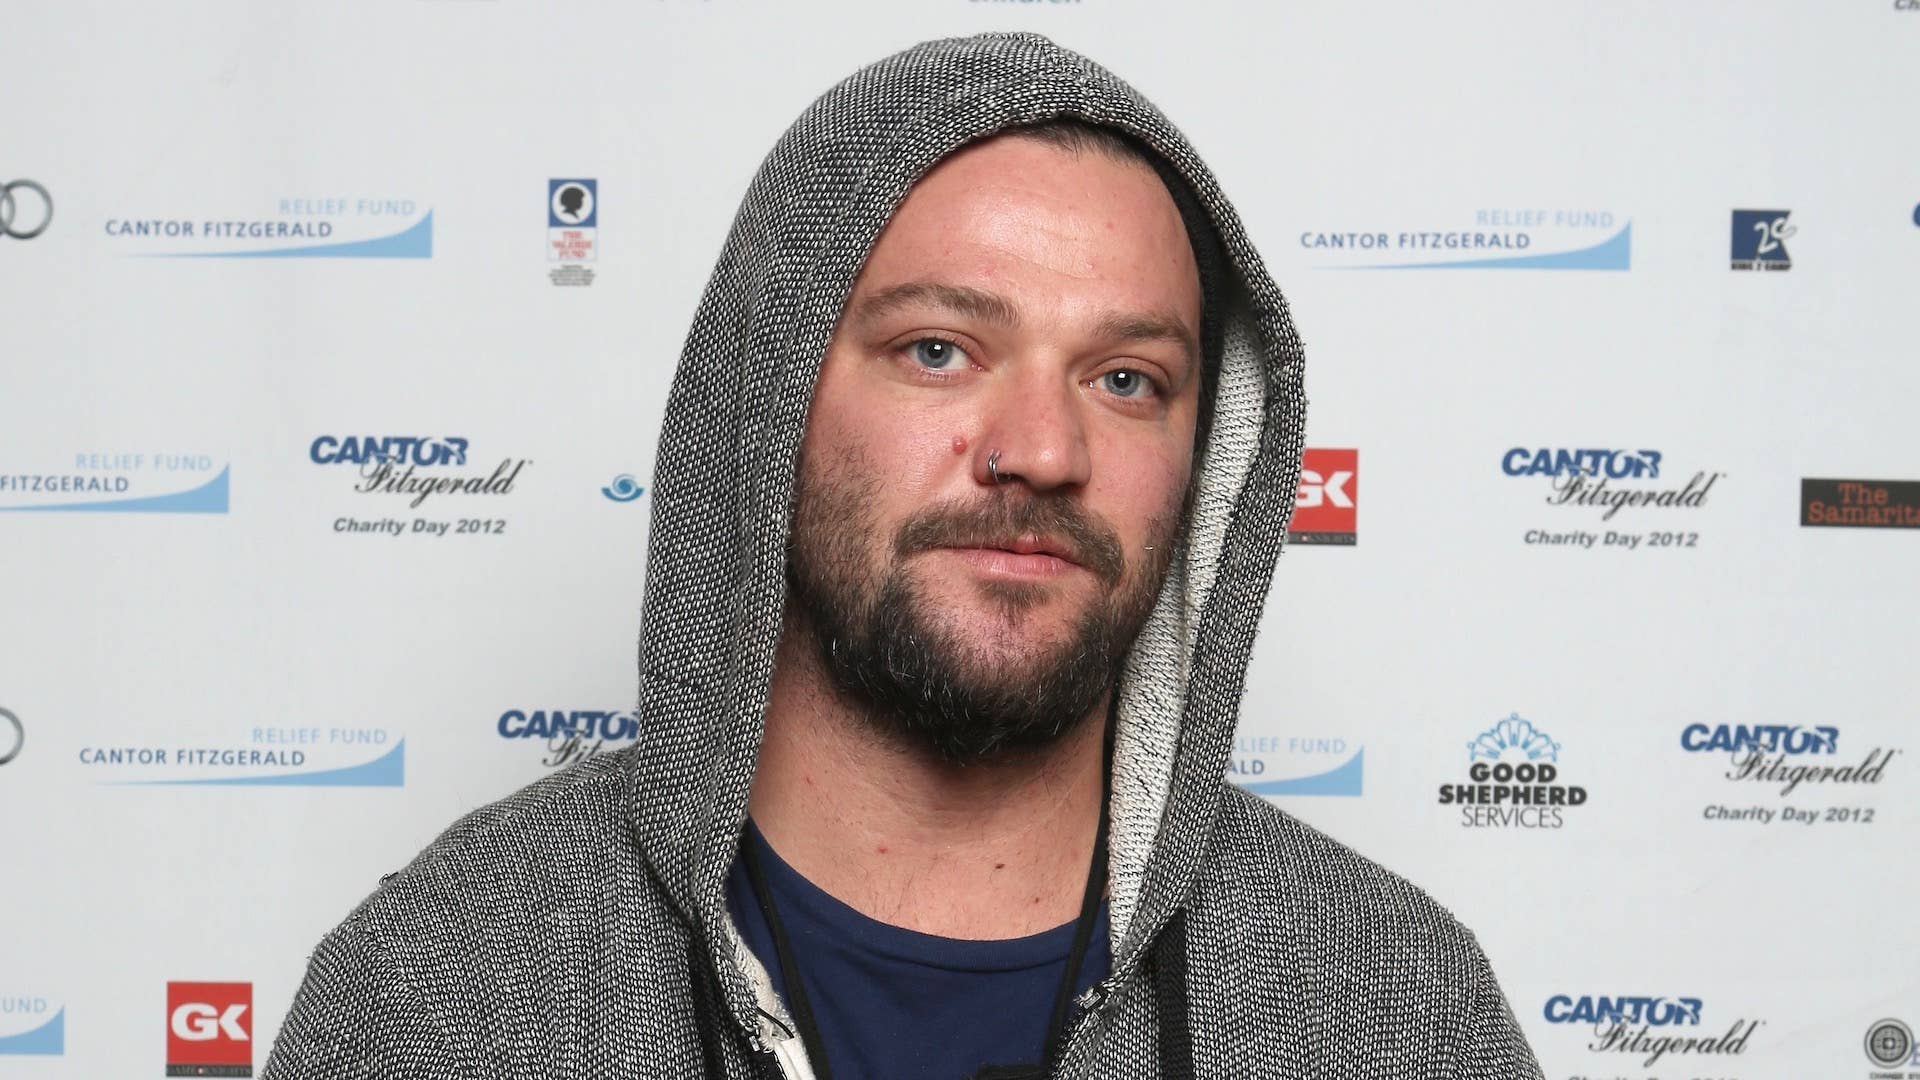 Bam Margera attends Cantor Fitzgerald & BGC Partners host annual charity day